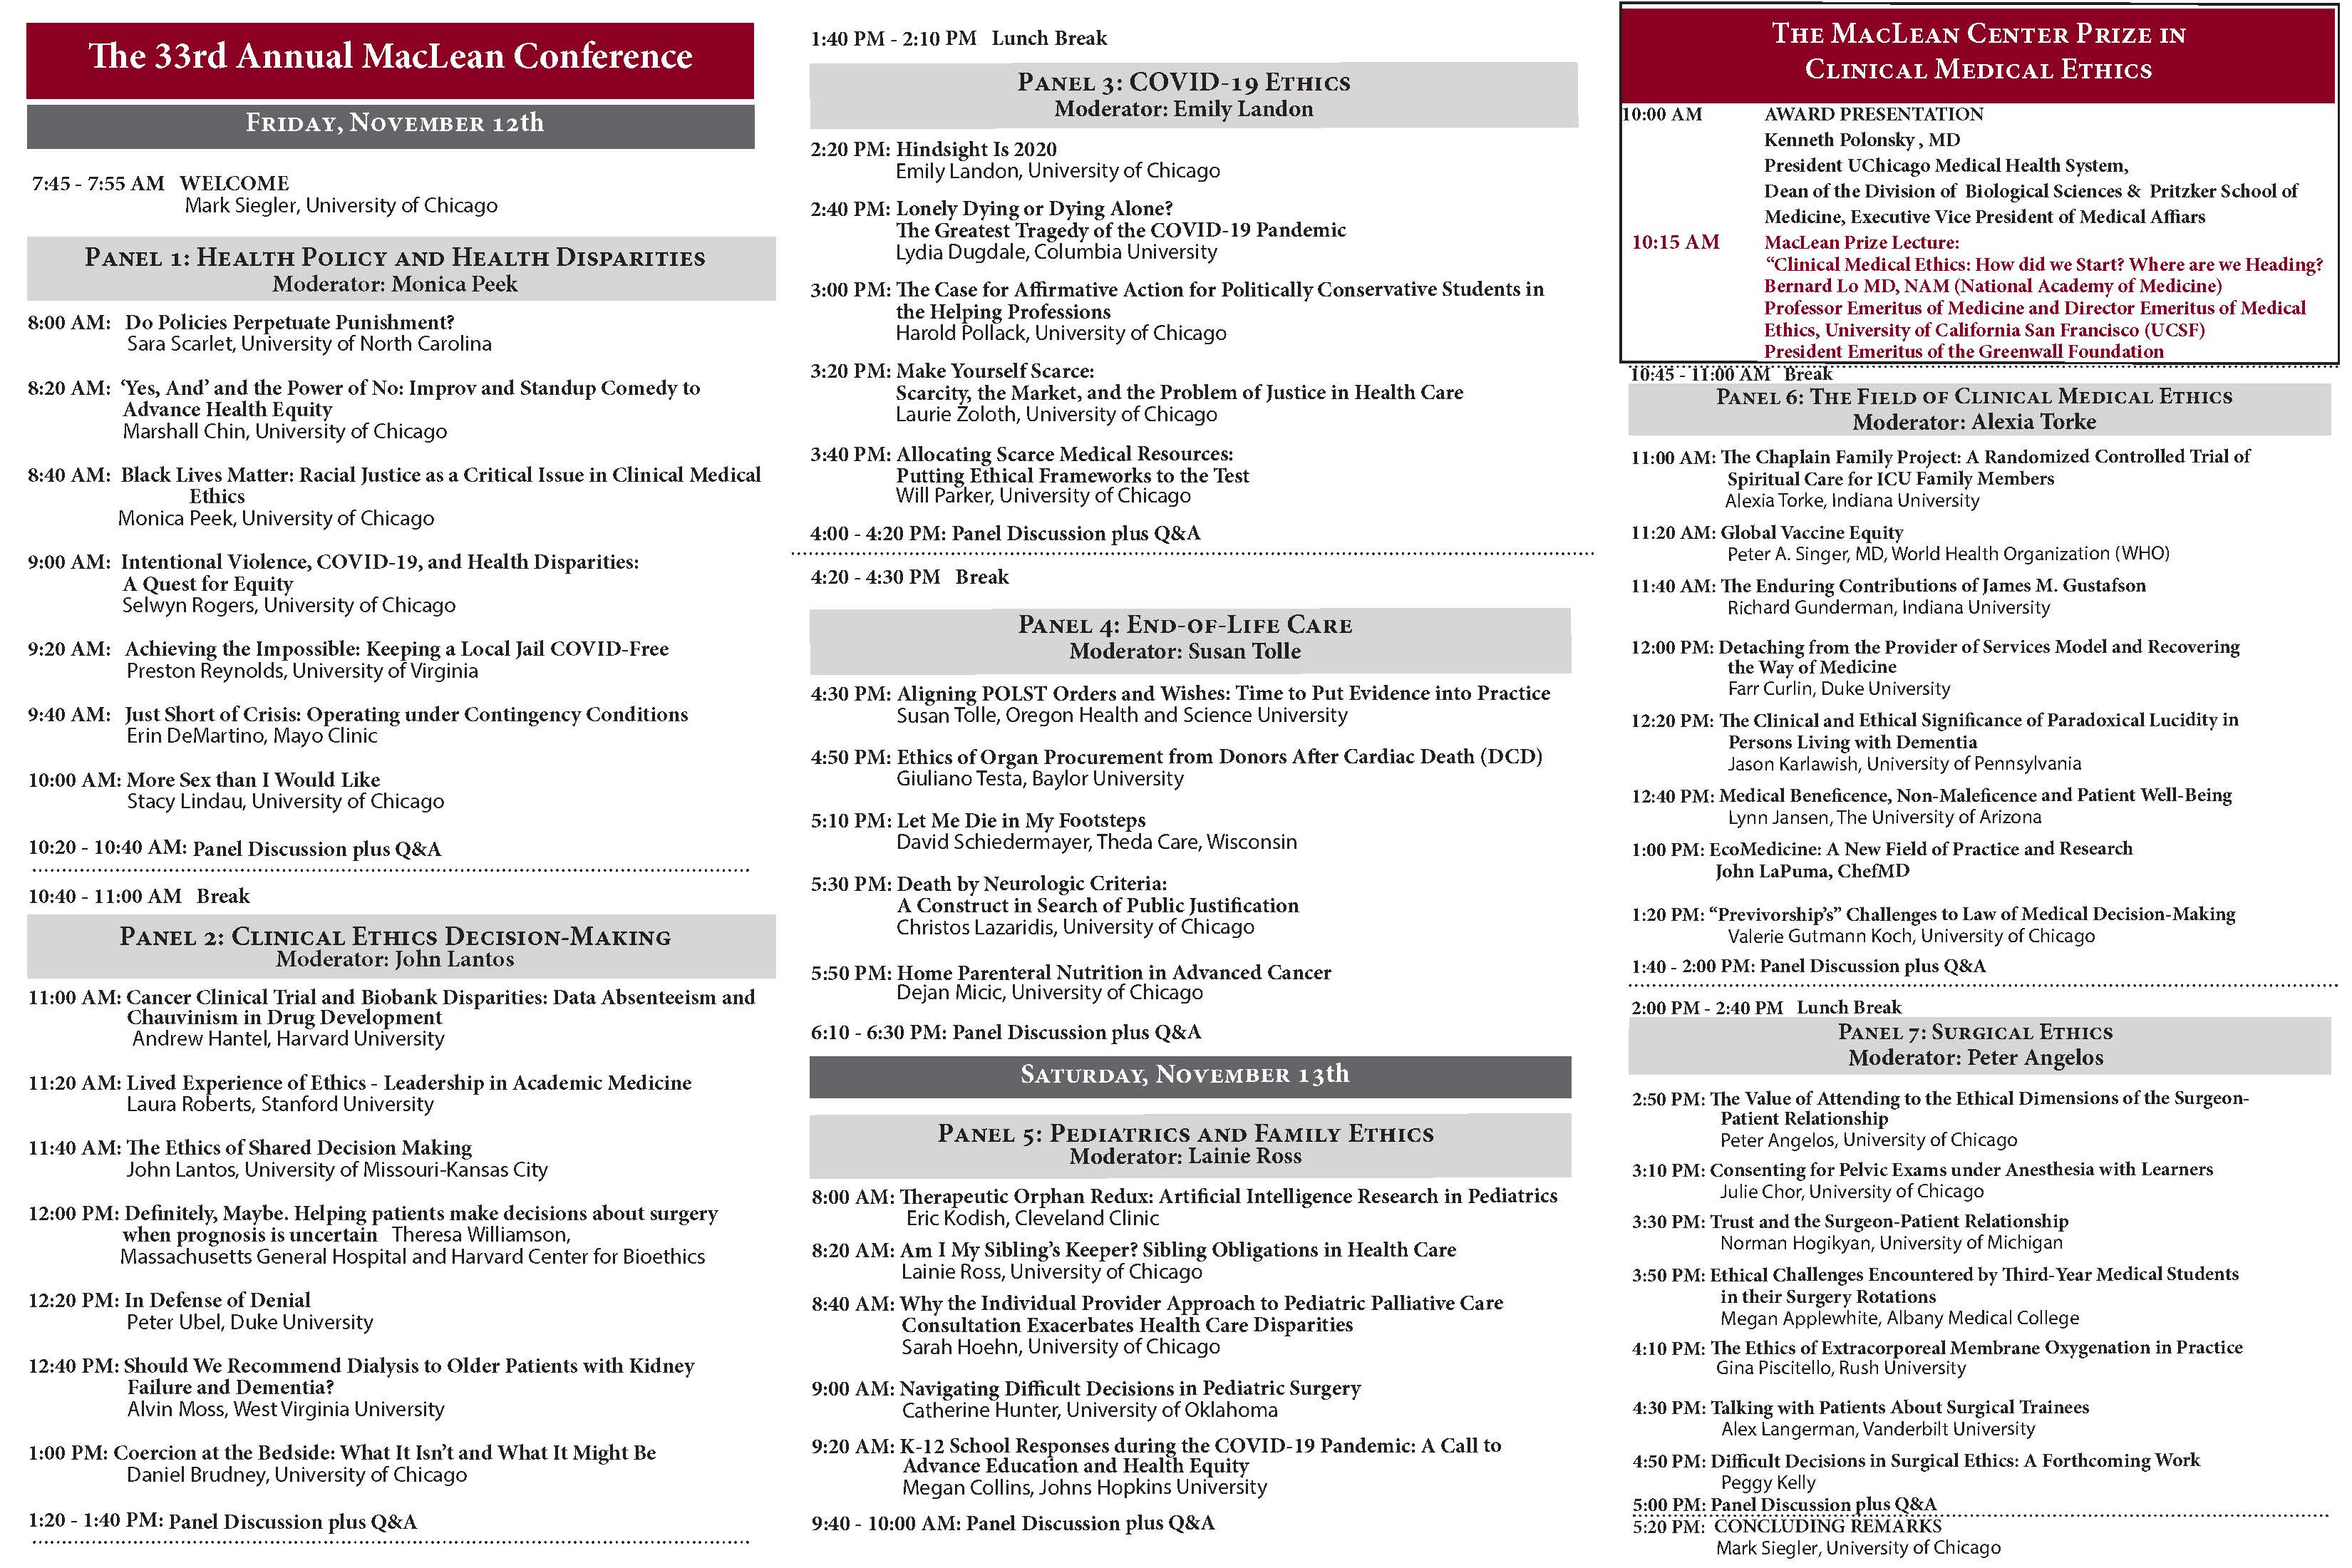 33rd Annual Dorothy J. MacLean Fellows Conference on Clinical Medical Ethics Agenda